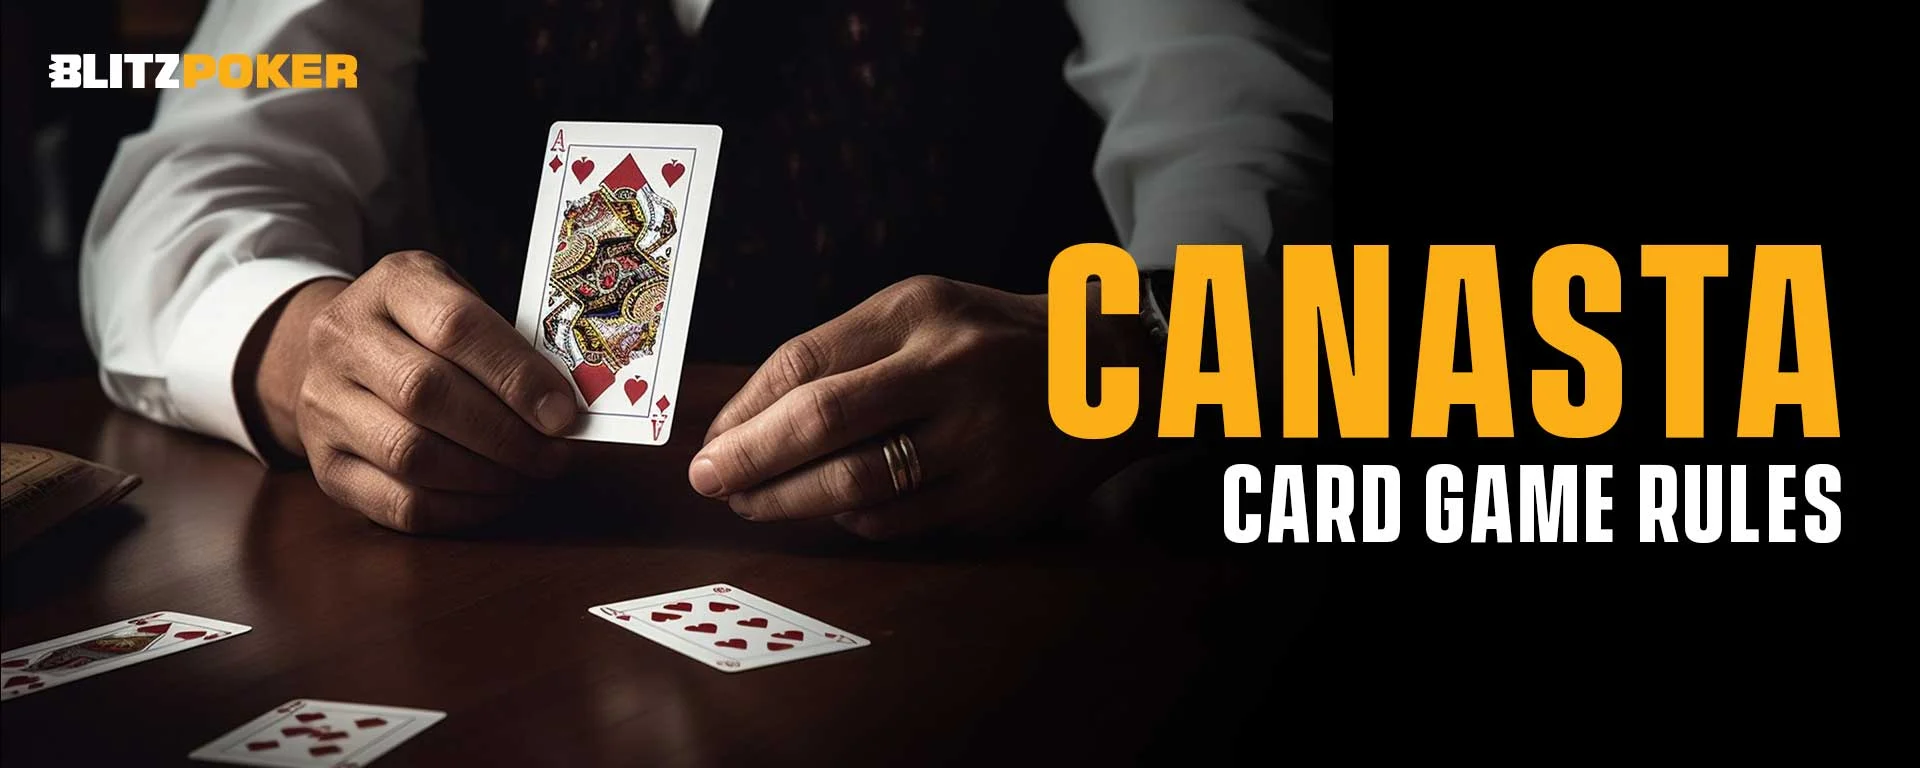 Canasta Card Game Rules, How To Play, Variations and More